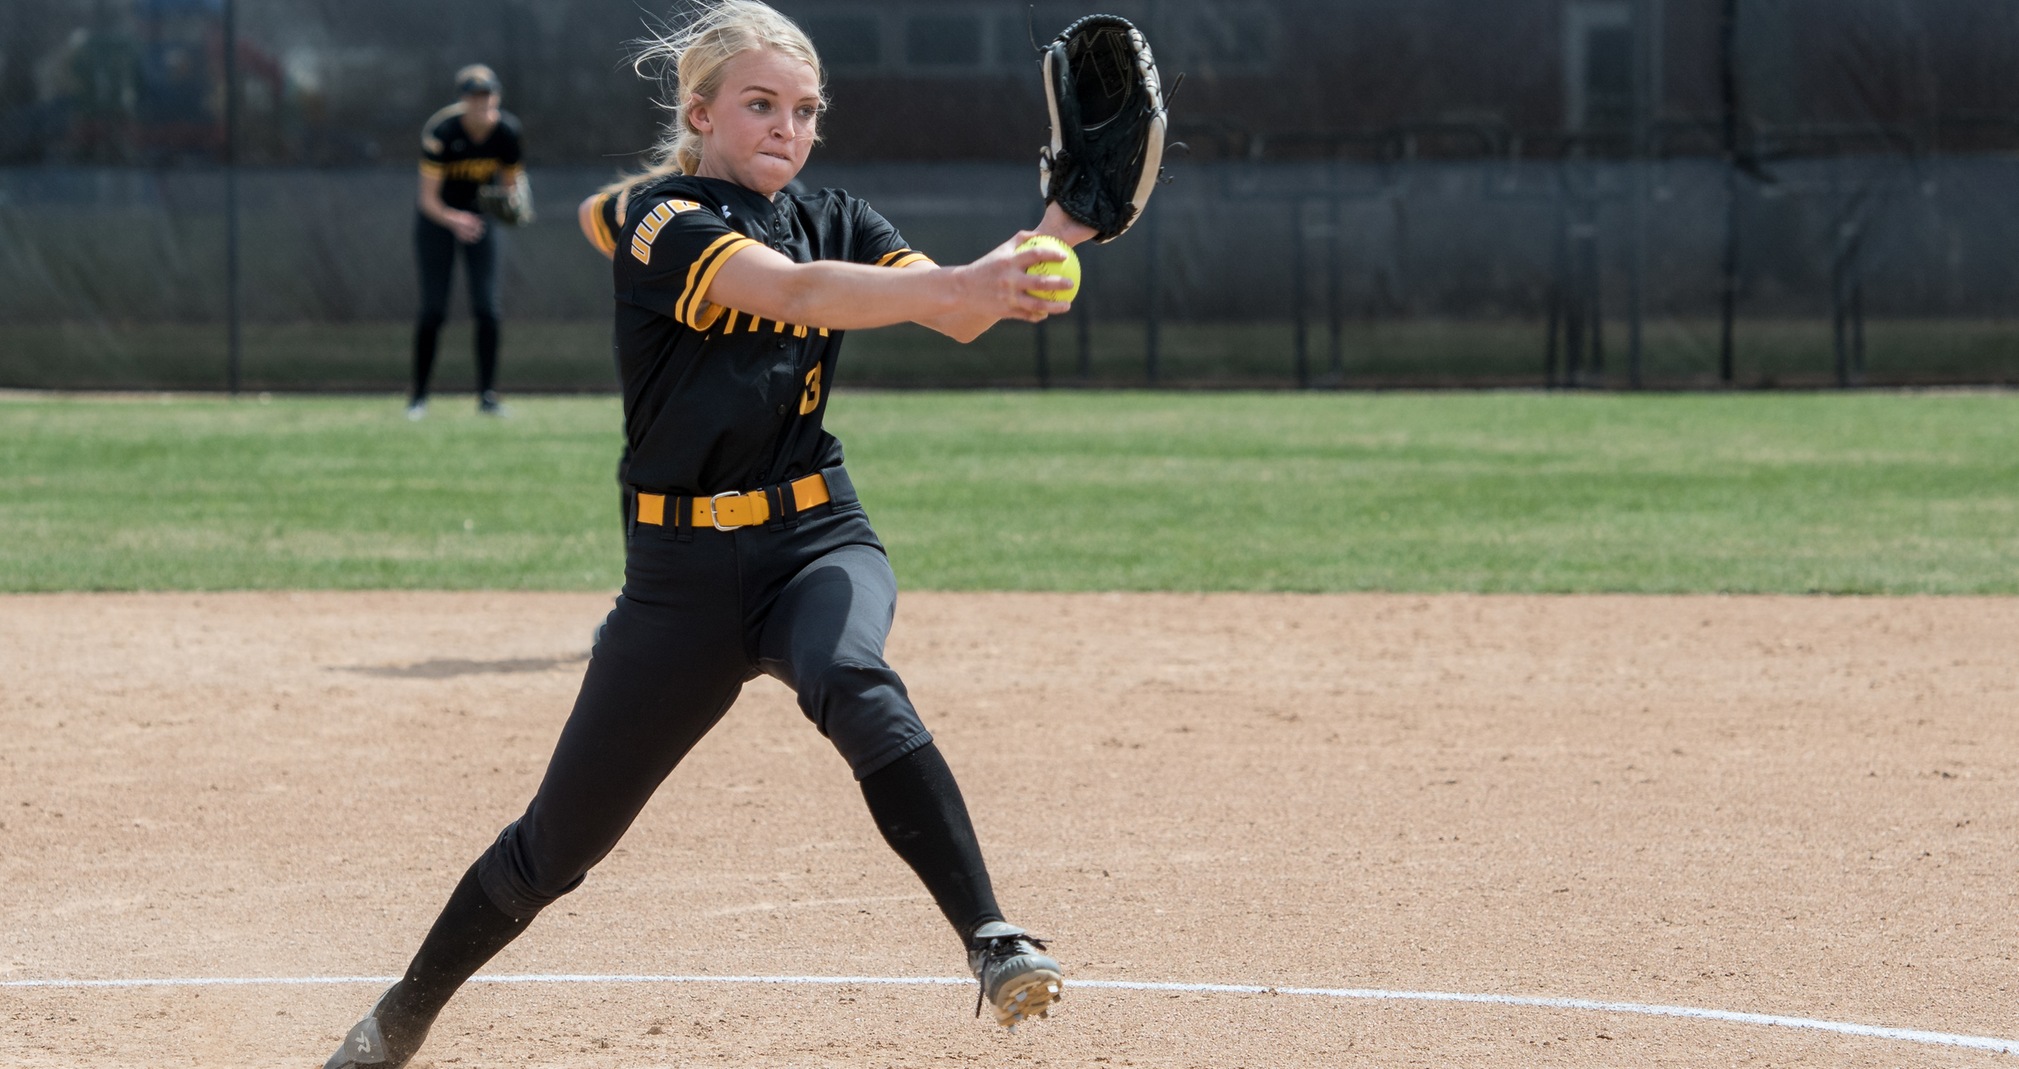 Bailey Smaney tossed a one-hit shutout during the Titans' win over Gustavus Adolphus College.